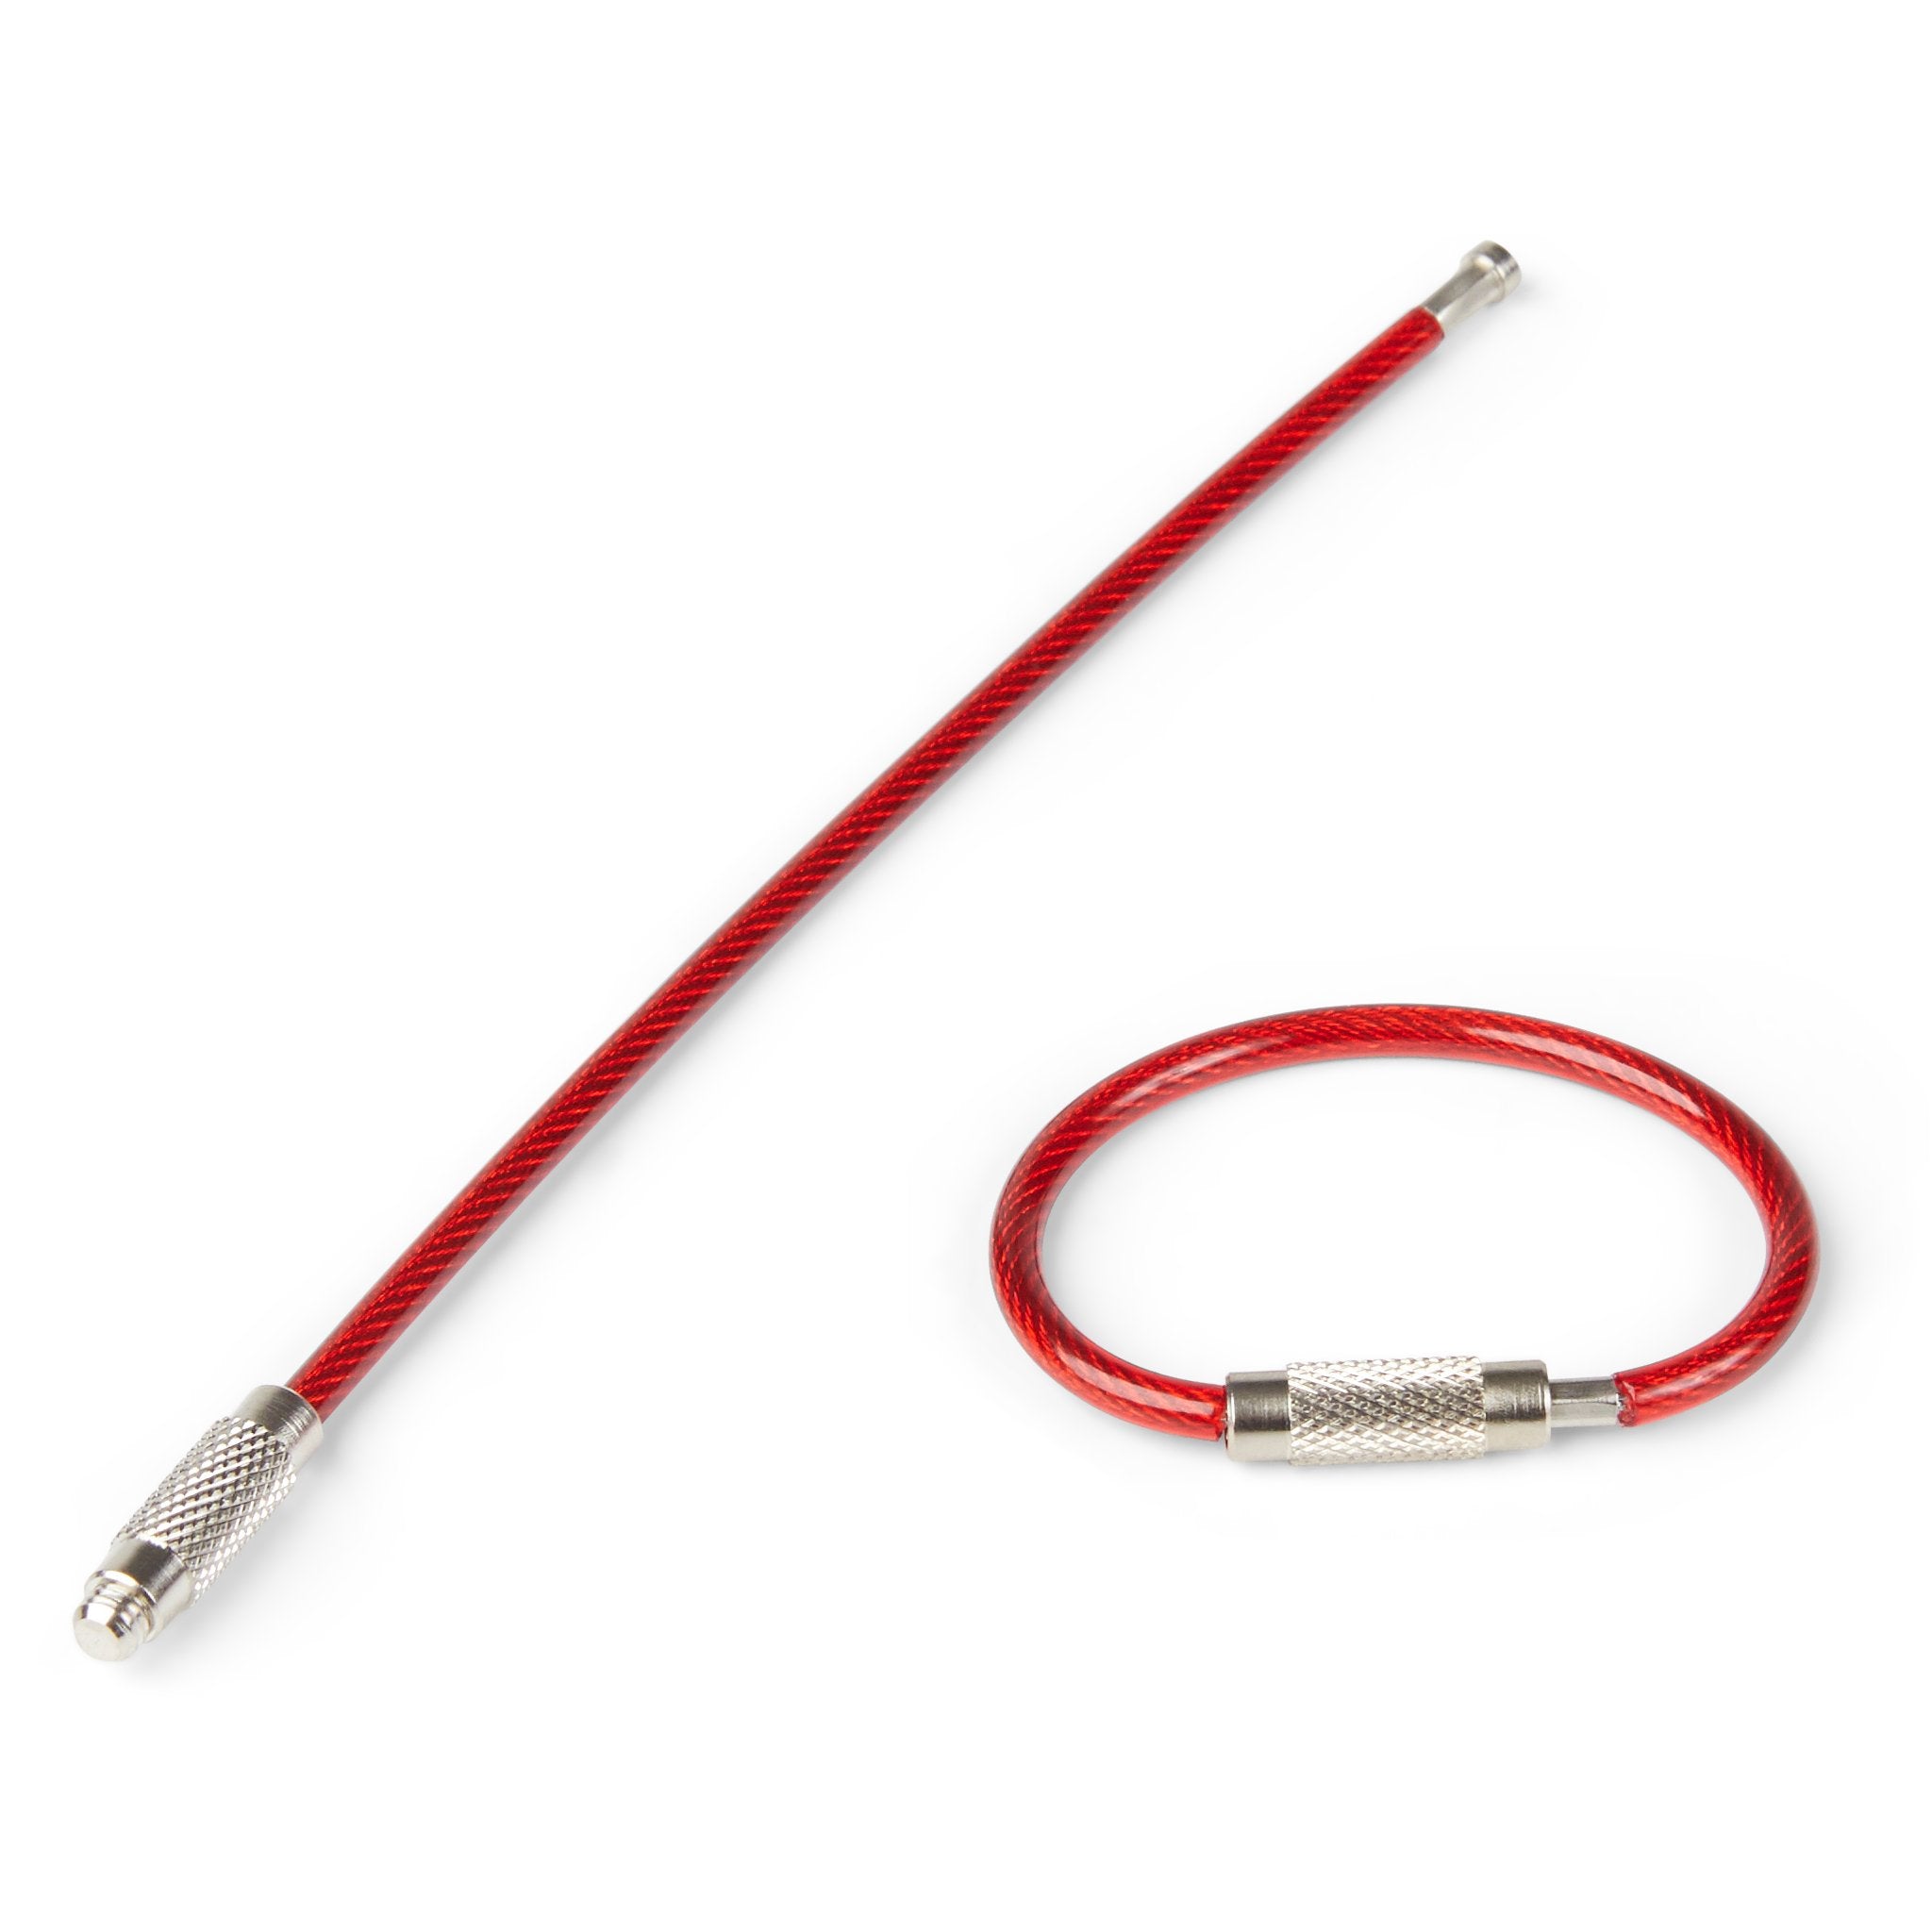 Screwlock Cable - 3mm x 150mm